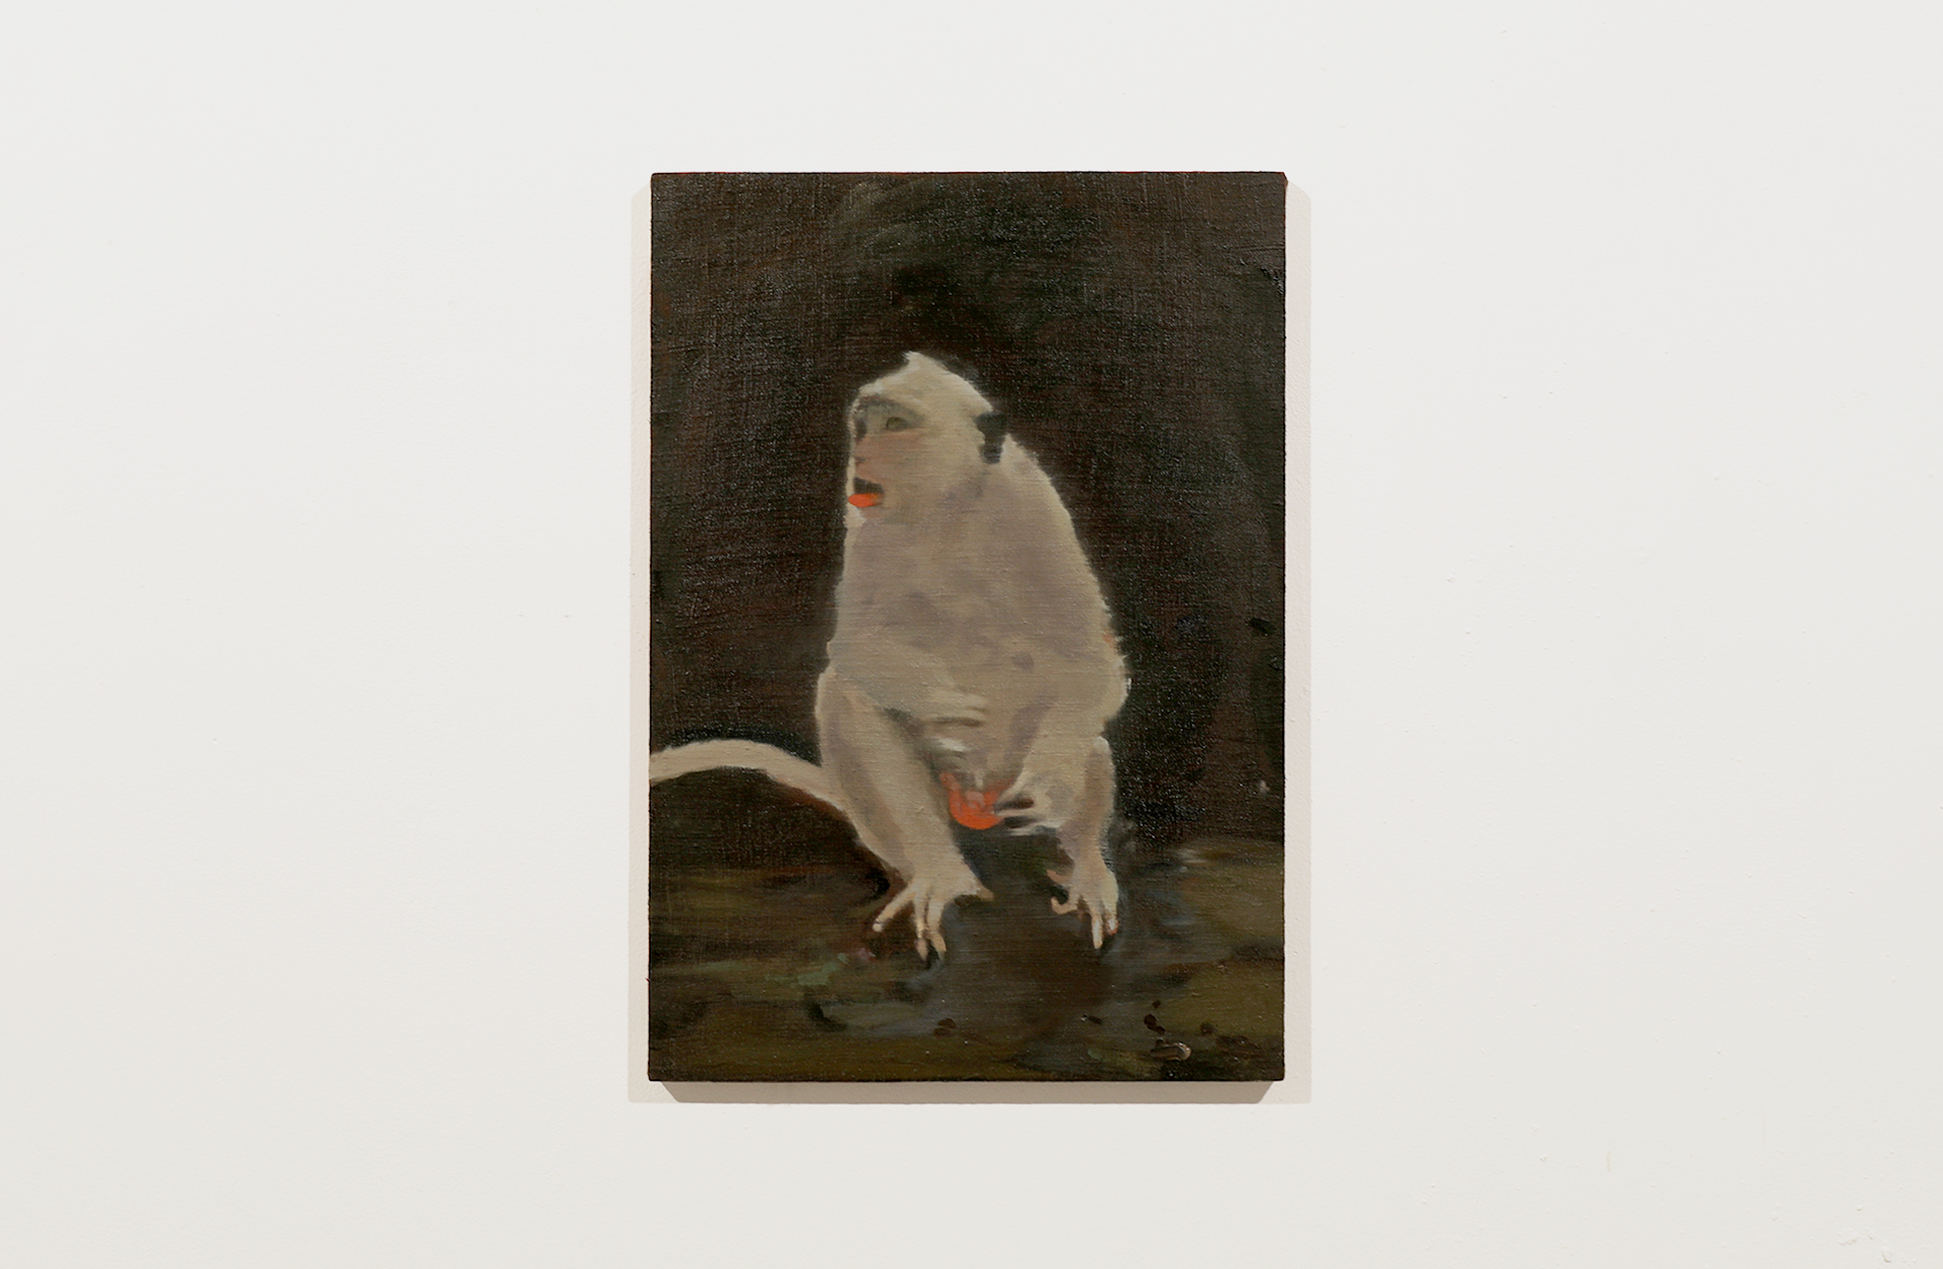  'The Year of the Flu (Macaca fascicularis)' 2019, oil on linen. 